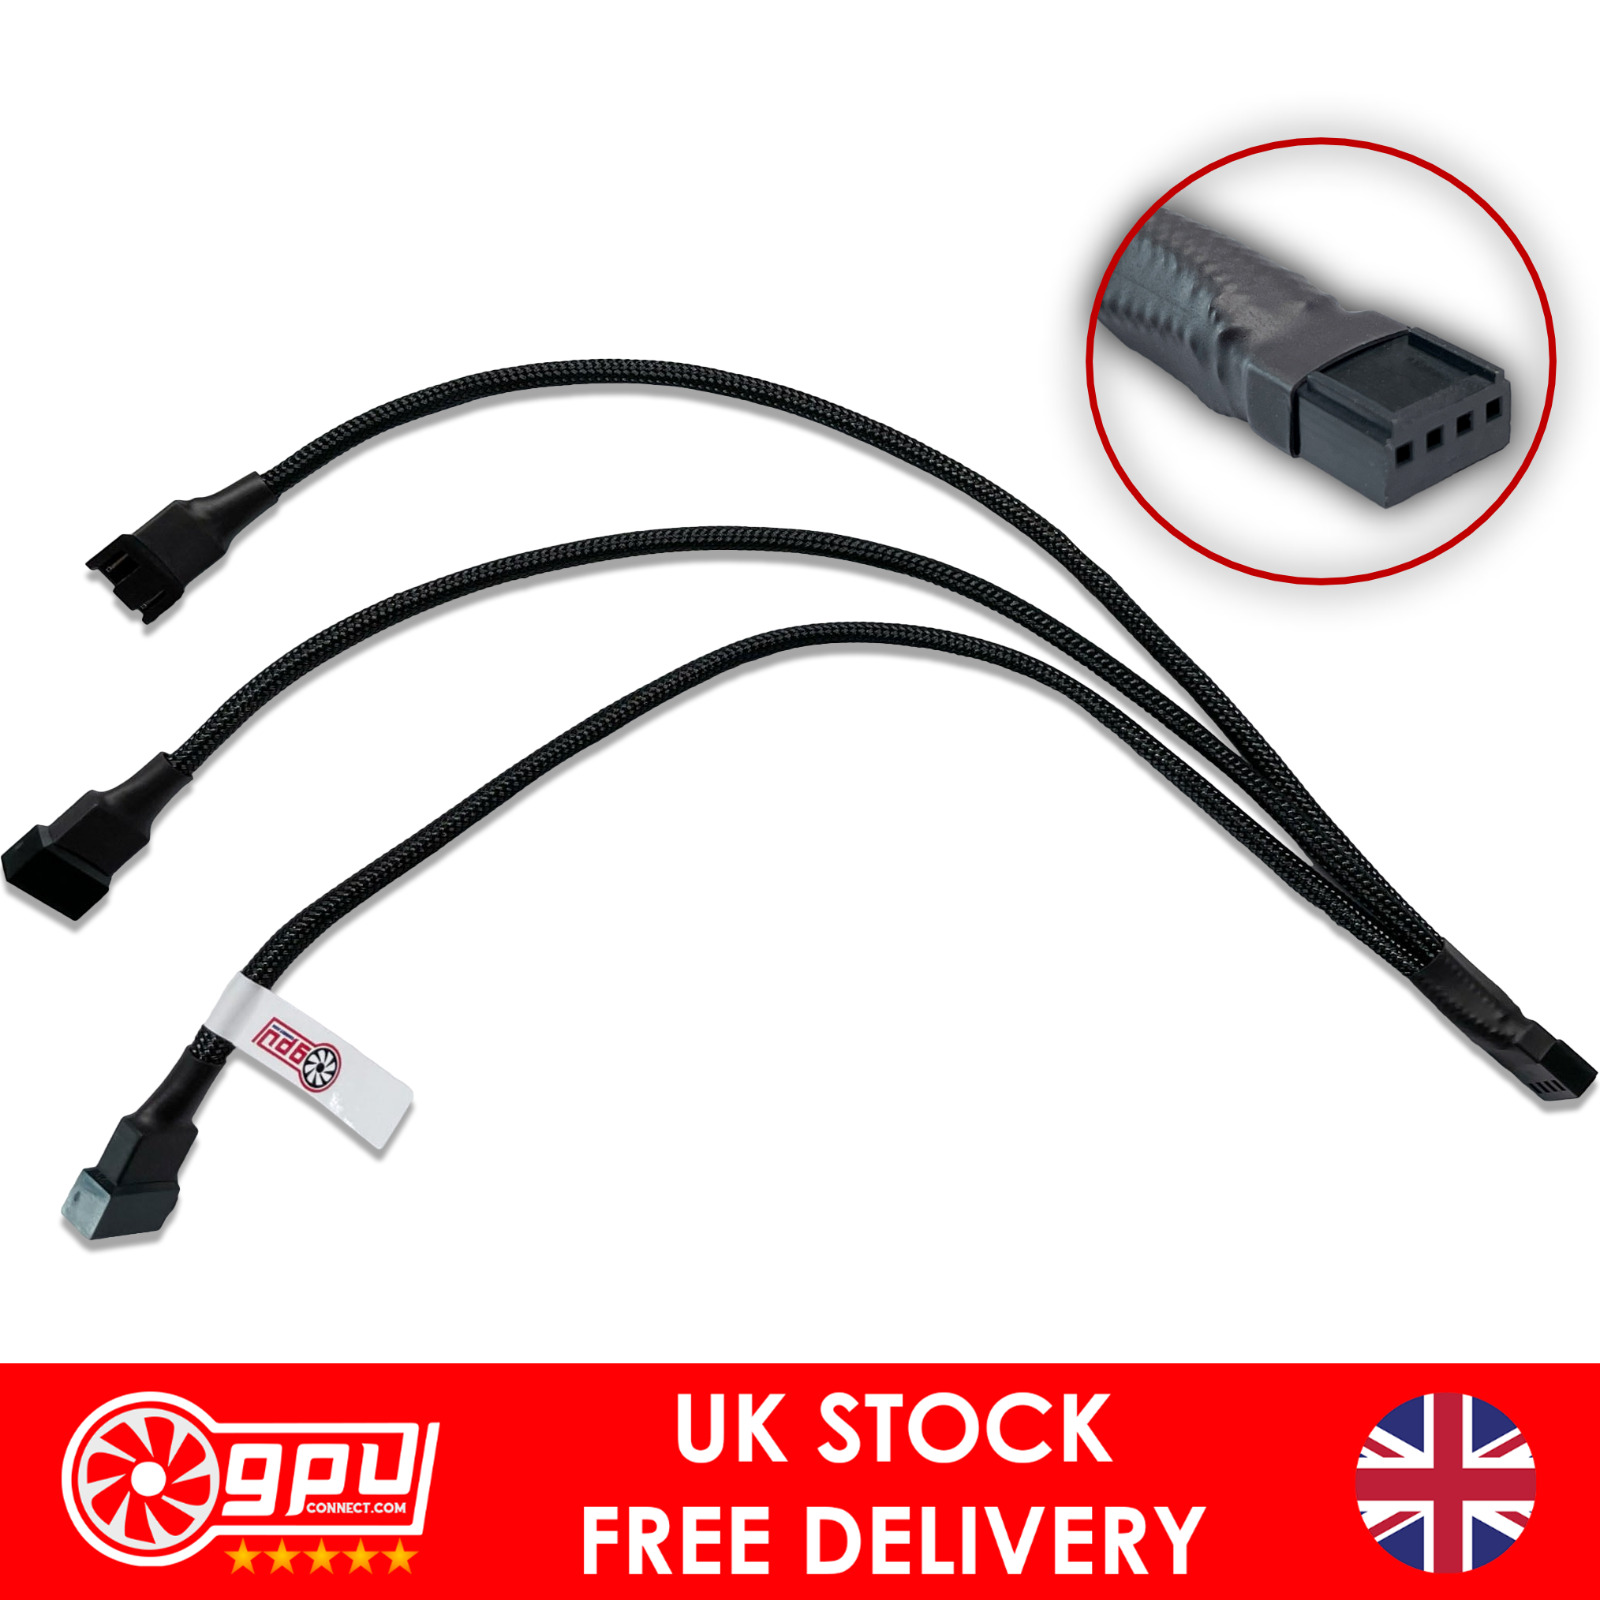 PREMIUM 3-Way Fan Splitter Cable 4-Pin Extension CPU - 26cm Black Sleeved